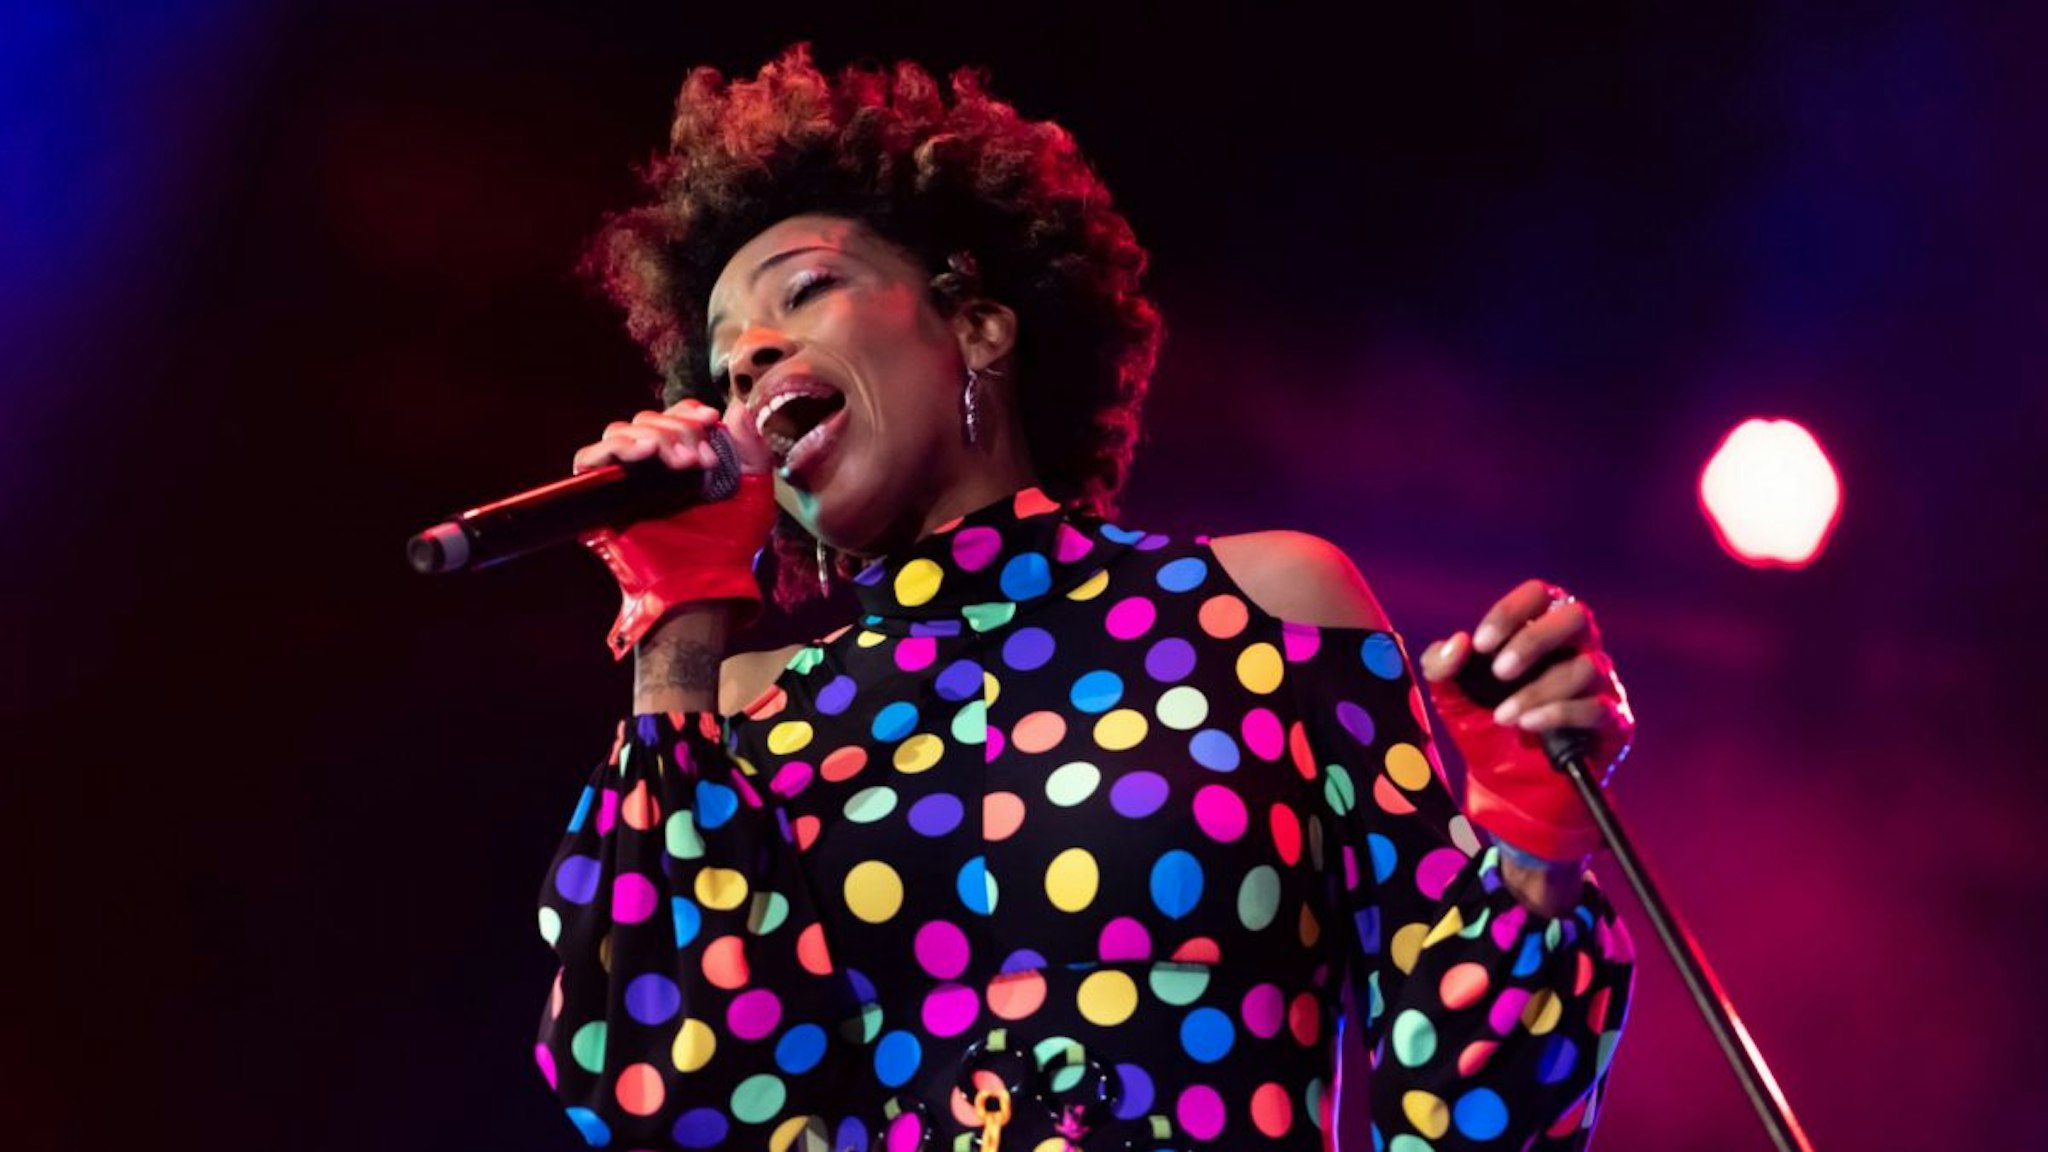 Macy Gray performs at the North Sea Jazz Festival at Rotterdam Ahoy on July 13, 2019 in Rotterdam, Netherlands.